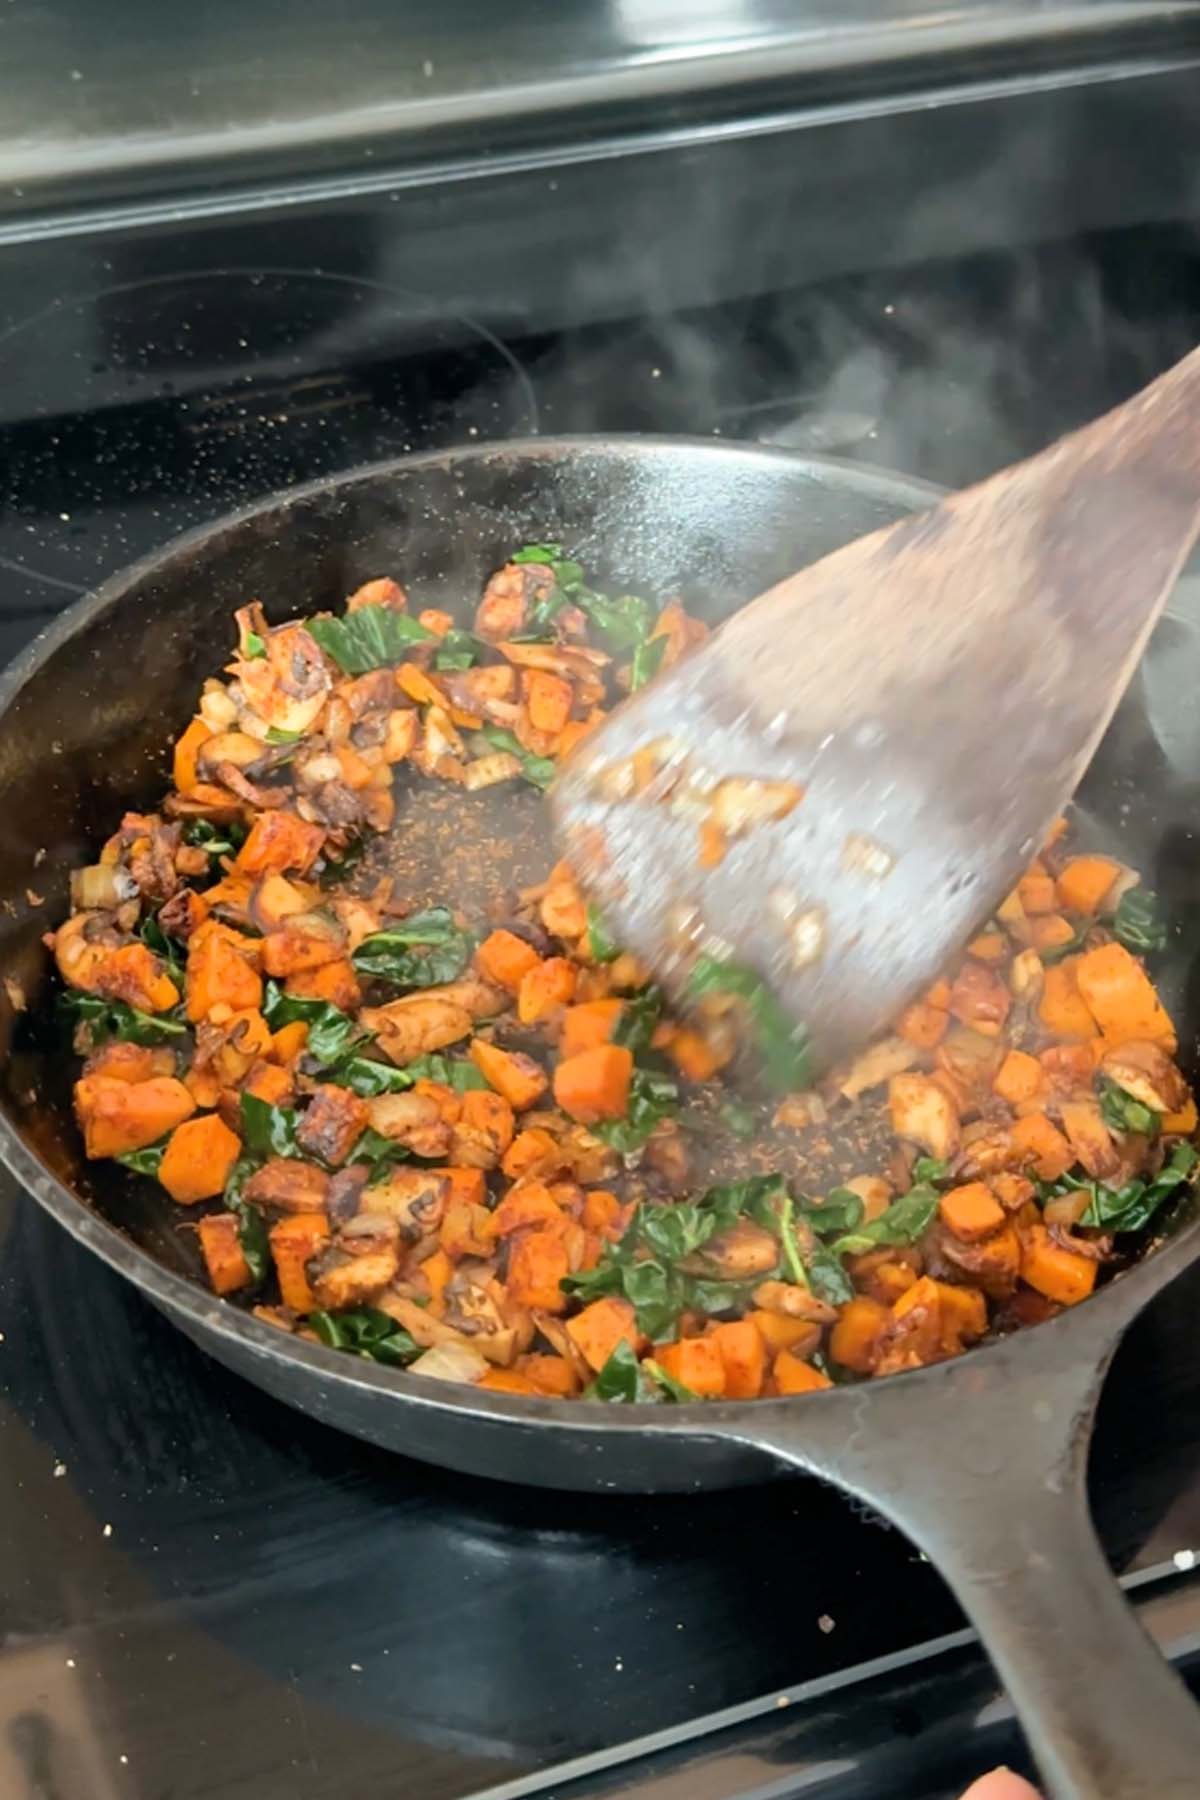 A wooden spoon stirs cubed sweet potato, kale, and sliced mushrooms in a cast iron skillet.